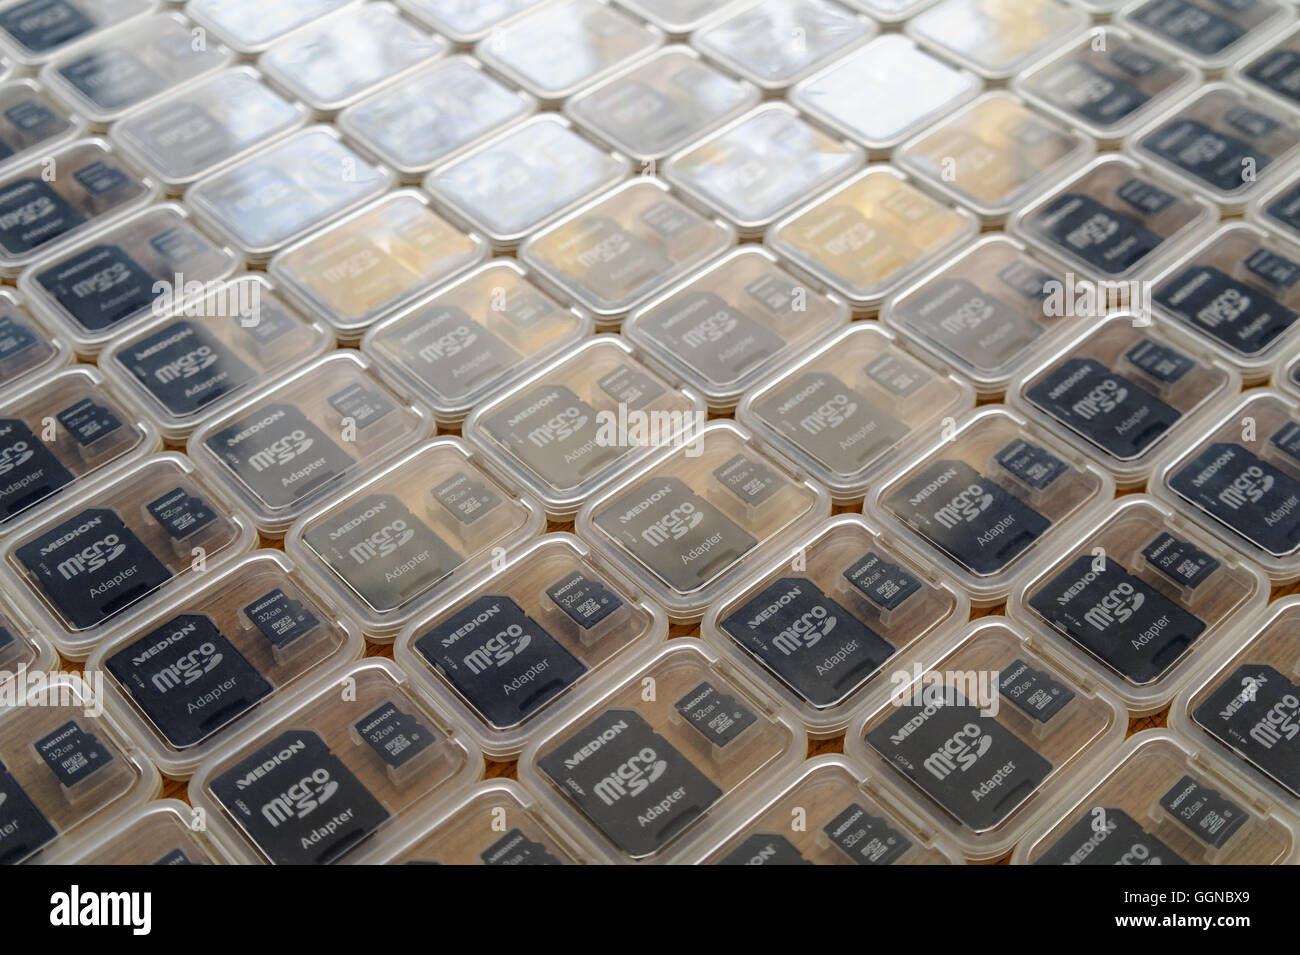 micro SD memory cards and adapters in transparent boxes in perspective view Stock Photo